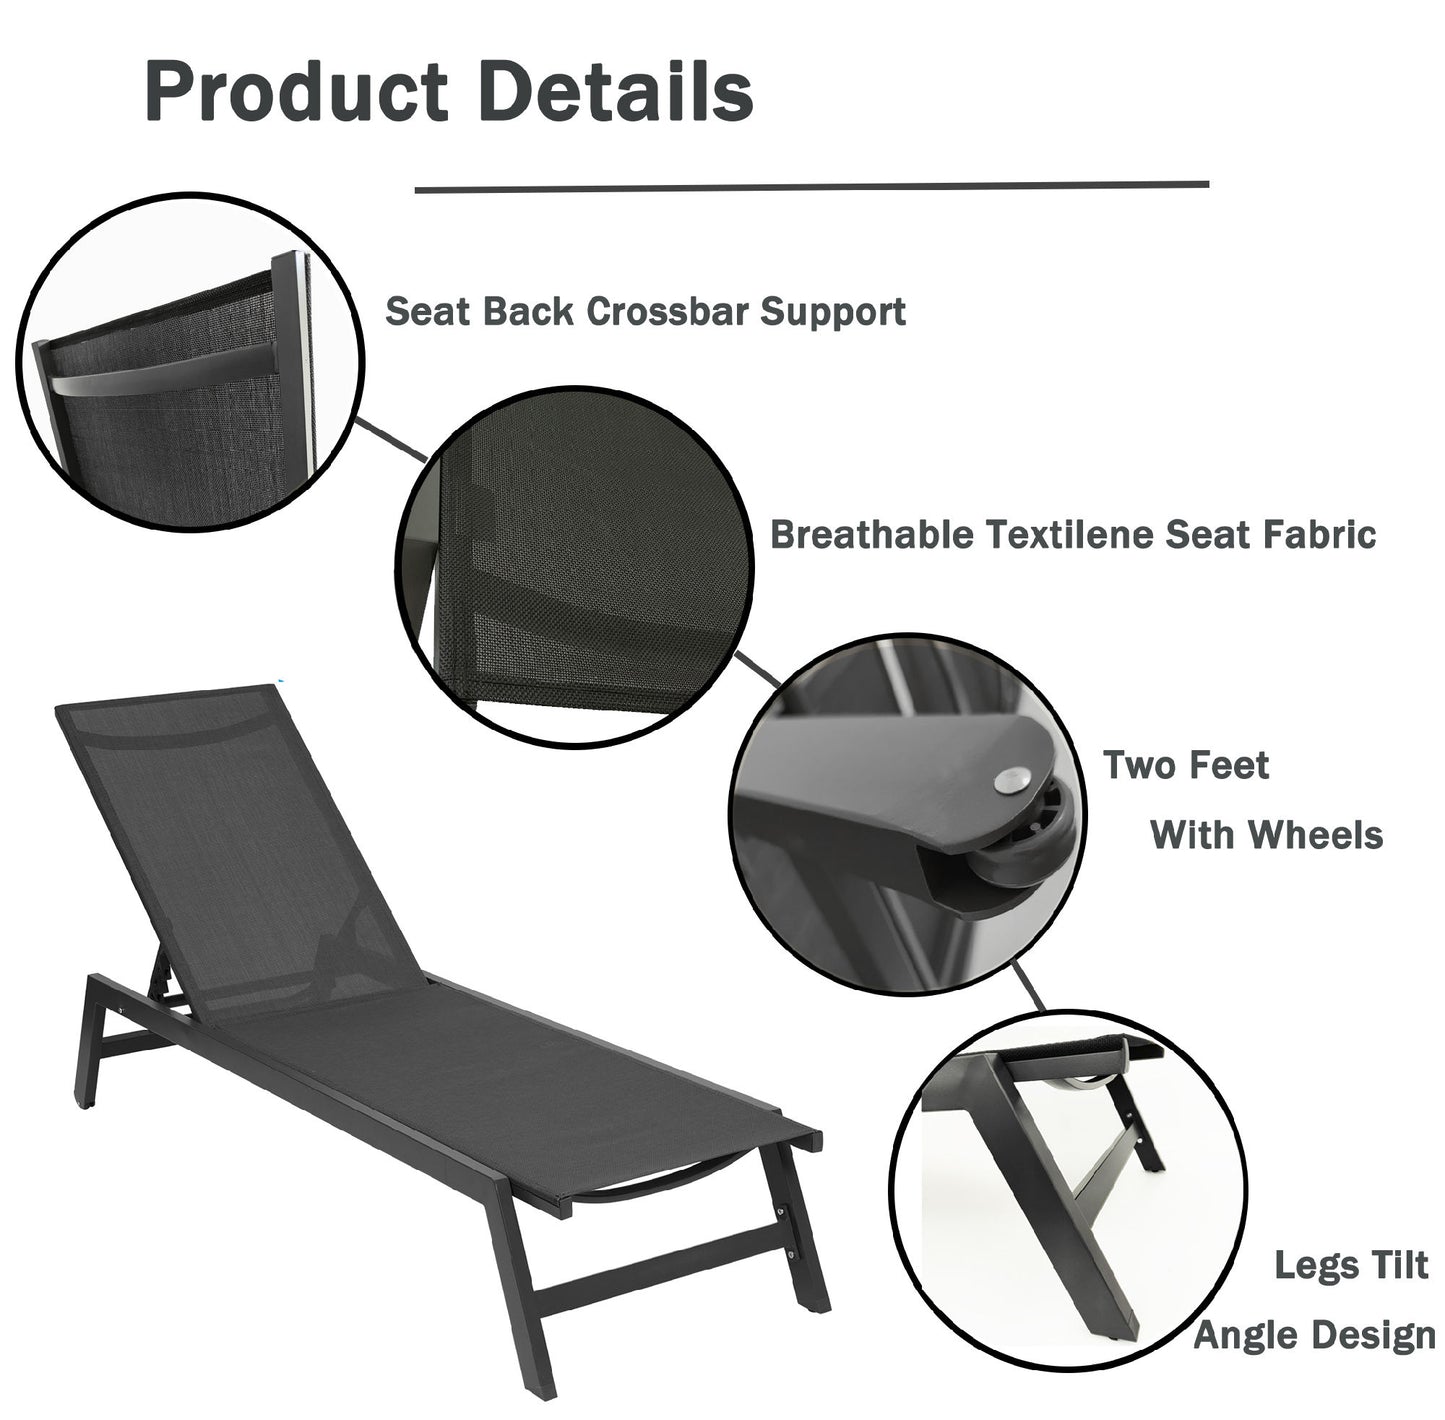 Outdoor Chaise Lounge Chair; Five-Position Adjustable Aluminum Recliner; All Weather For Patio; Beach; Yard;  Pool